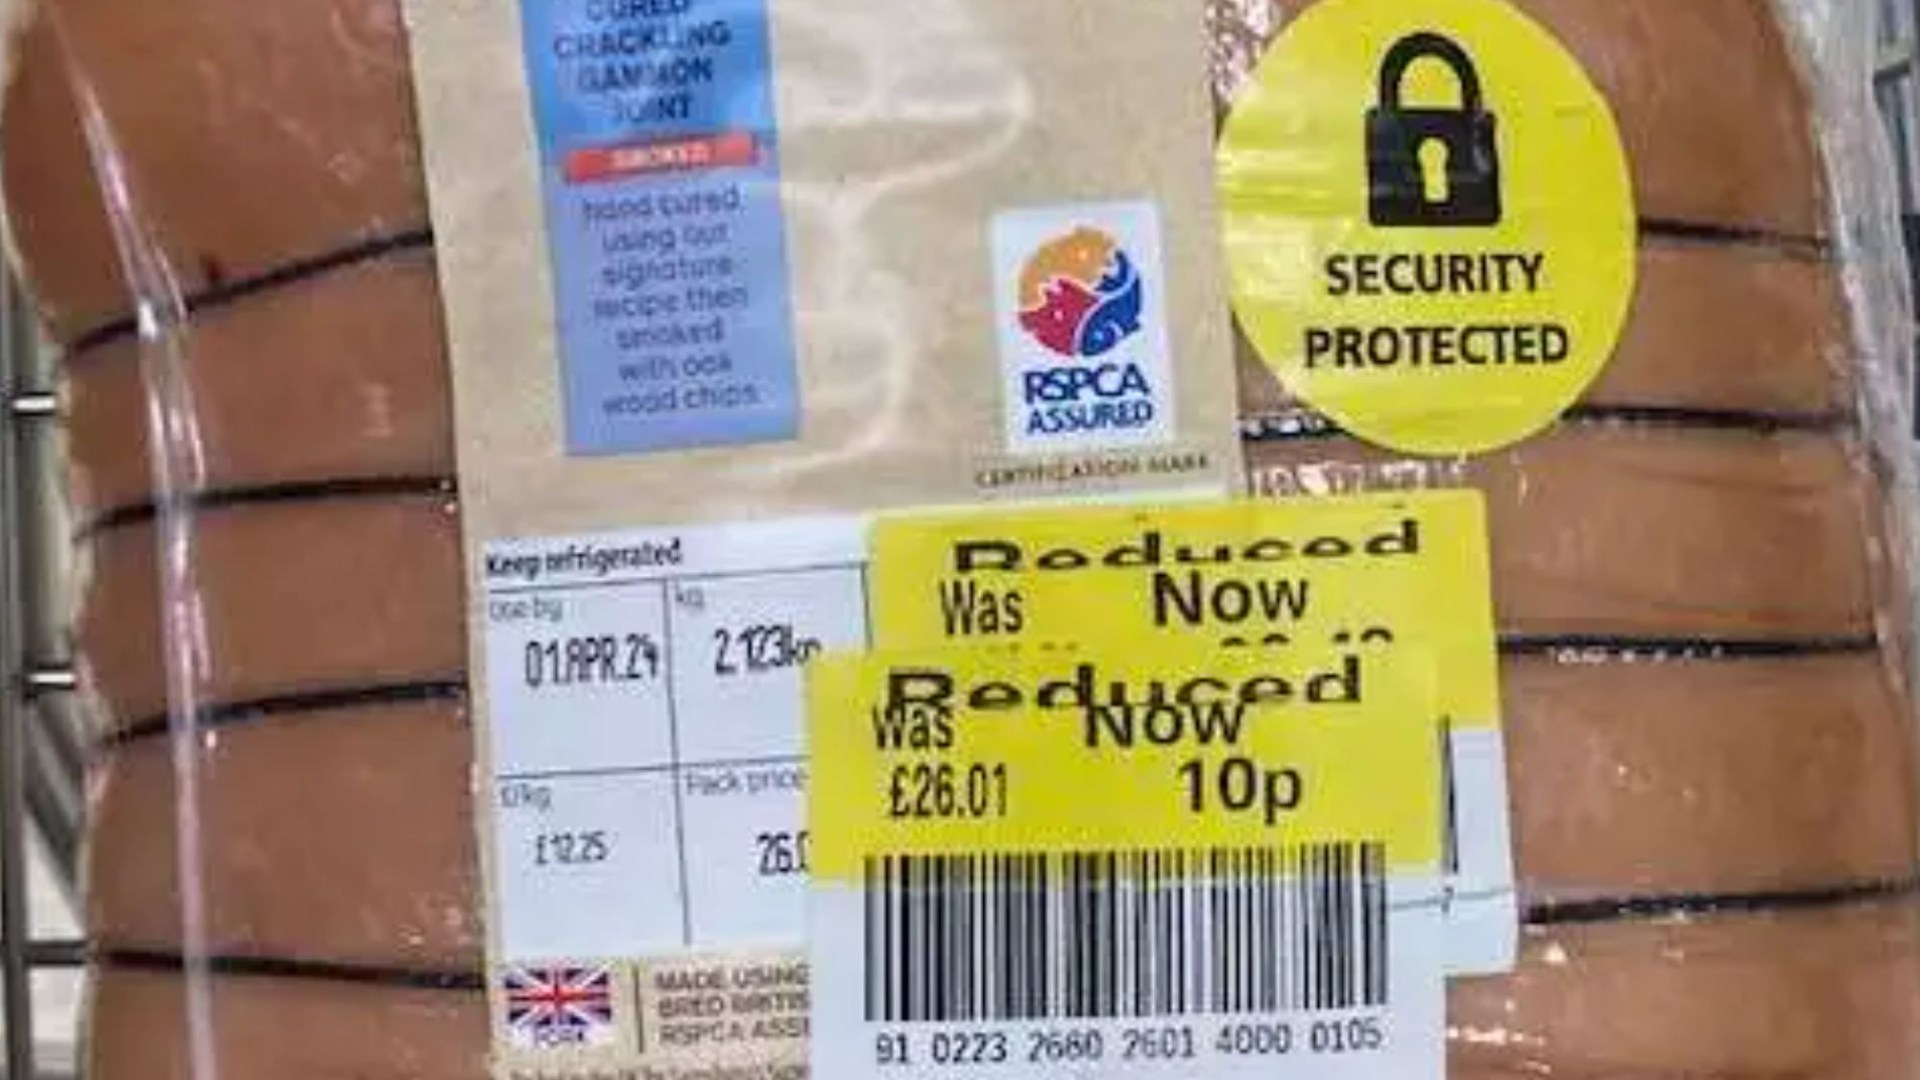 Best reduction ever shoppers are left totally stunned as well-known supermarket slash joints of meat down to just 6p [Video]